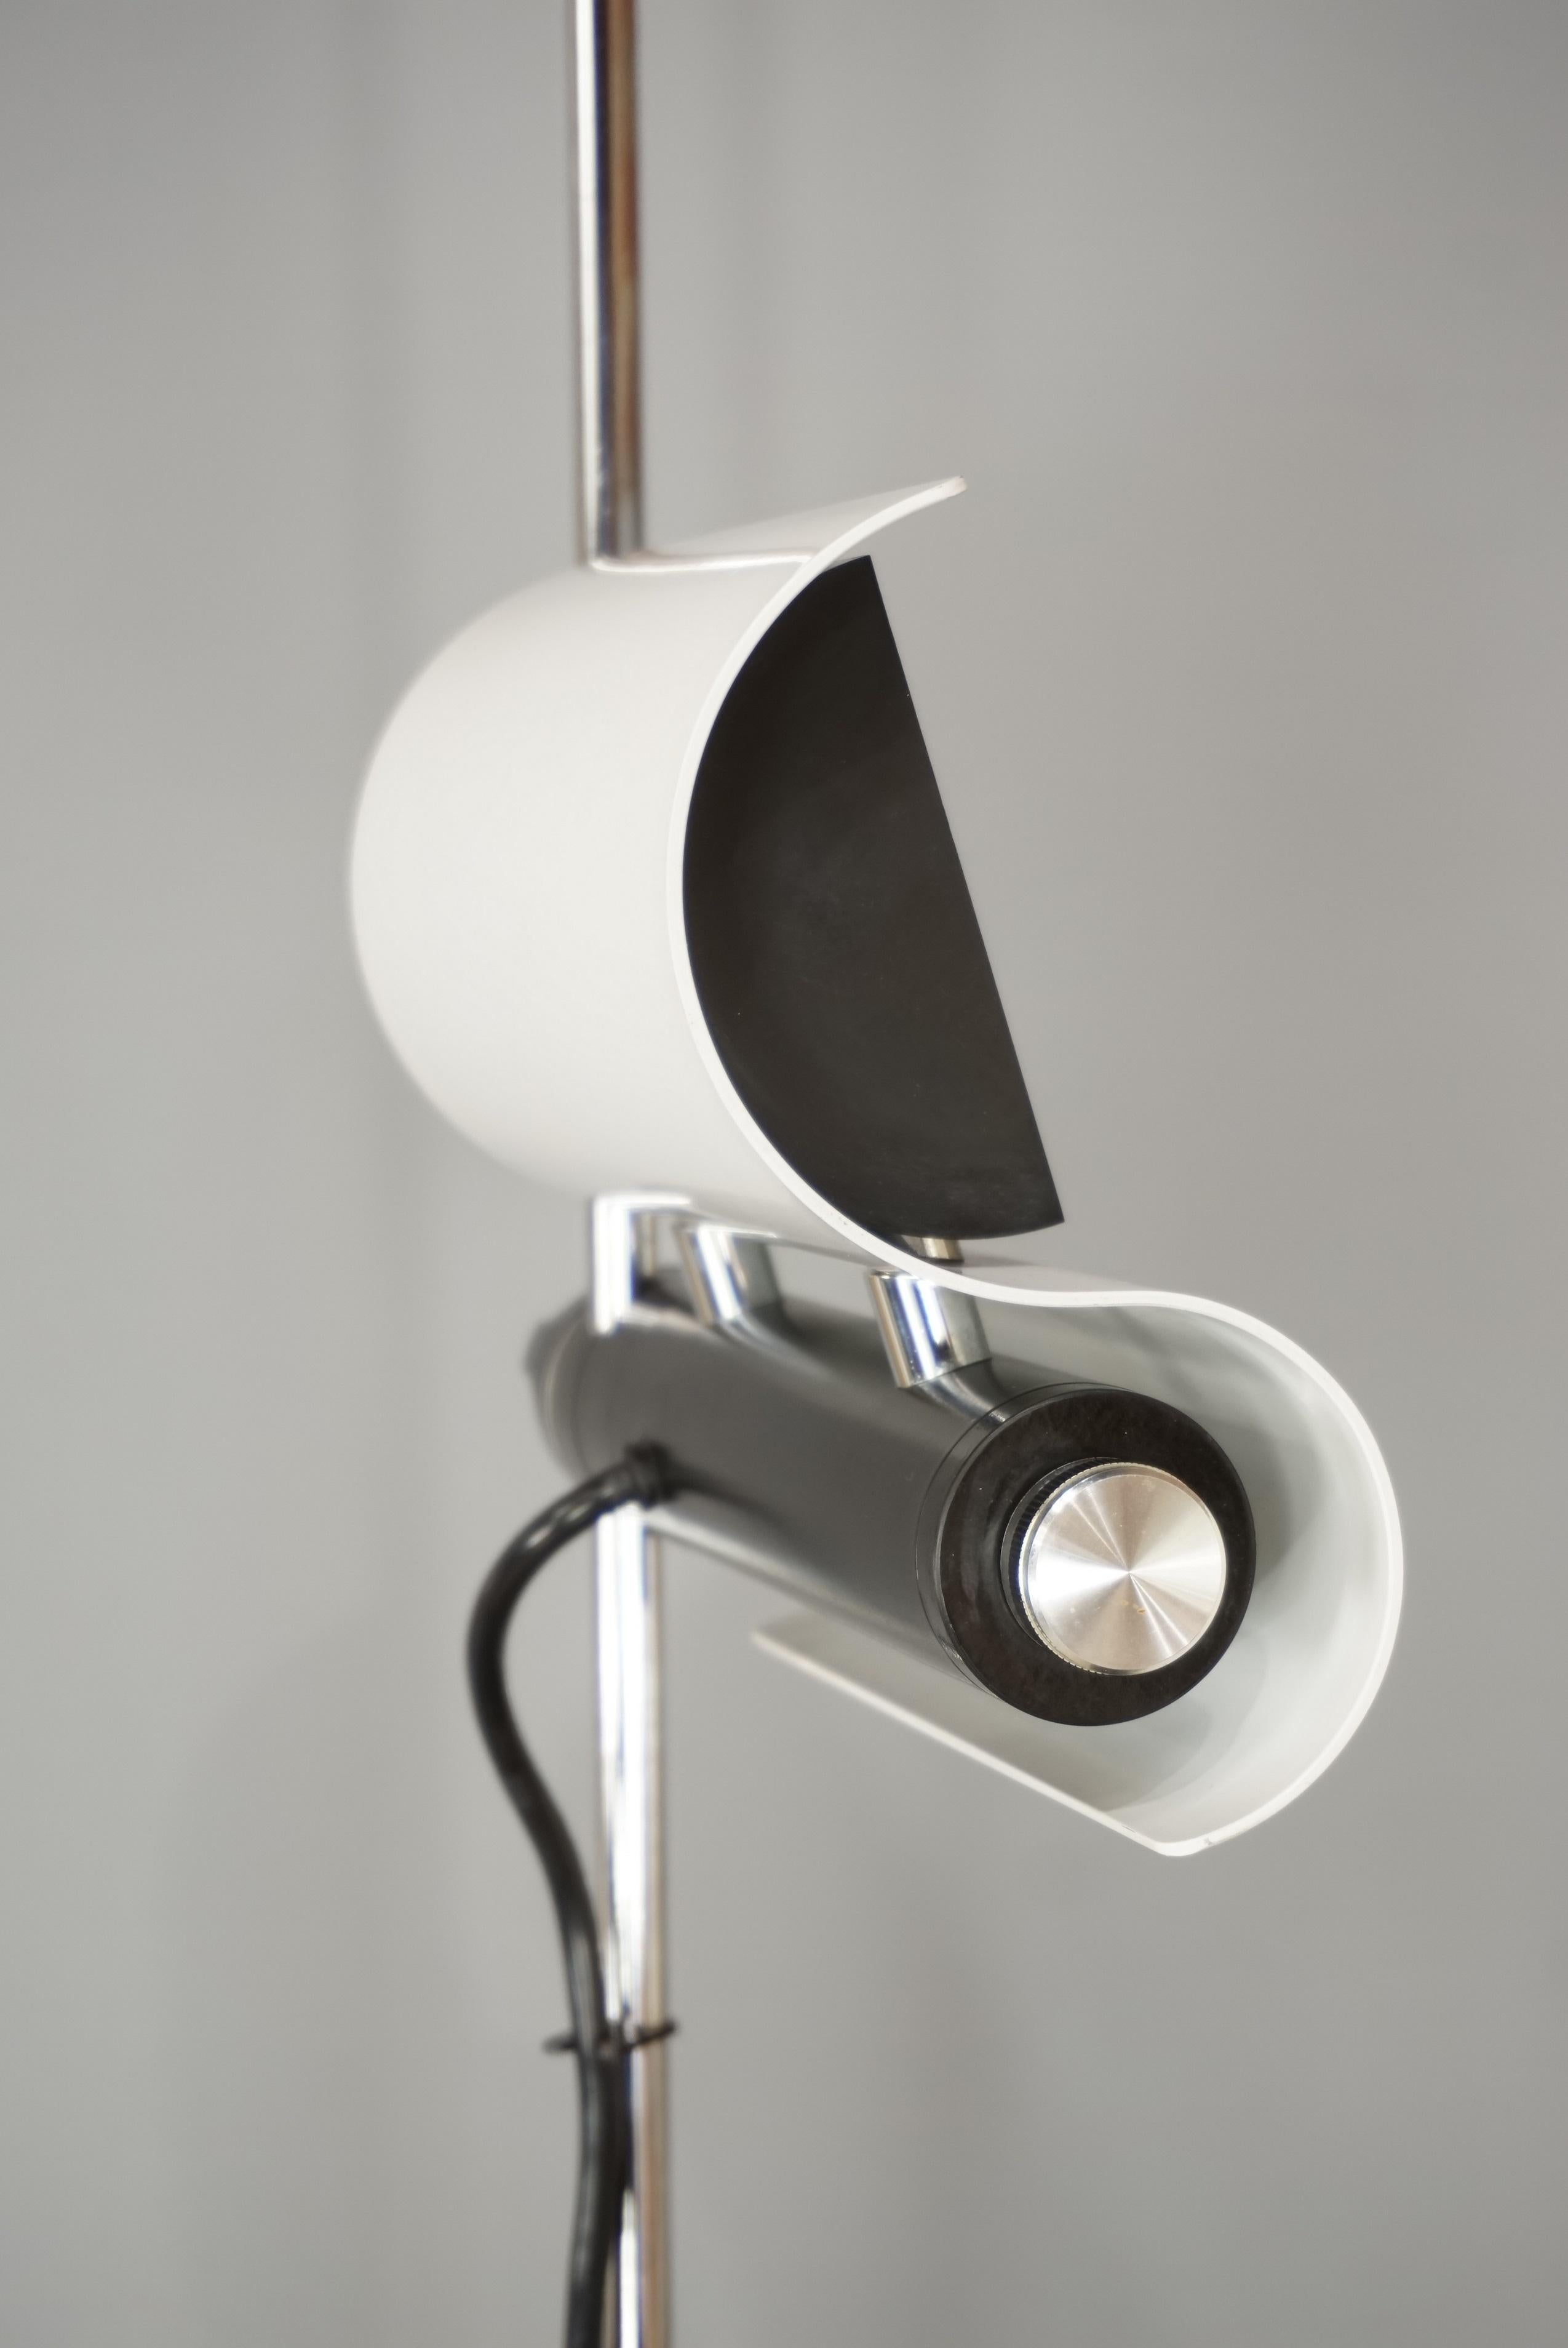 Aerial and poetic this floor lamp of the 1970s design by Vico Magistretti! It is composed of a central rod in chrome-plated metal, a base (diameter 30 cm) in white lacquered metal, an adjustable halogen receptacle adjustable in height along the rod